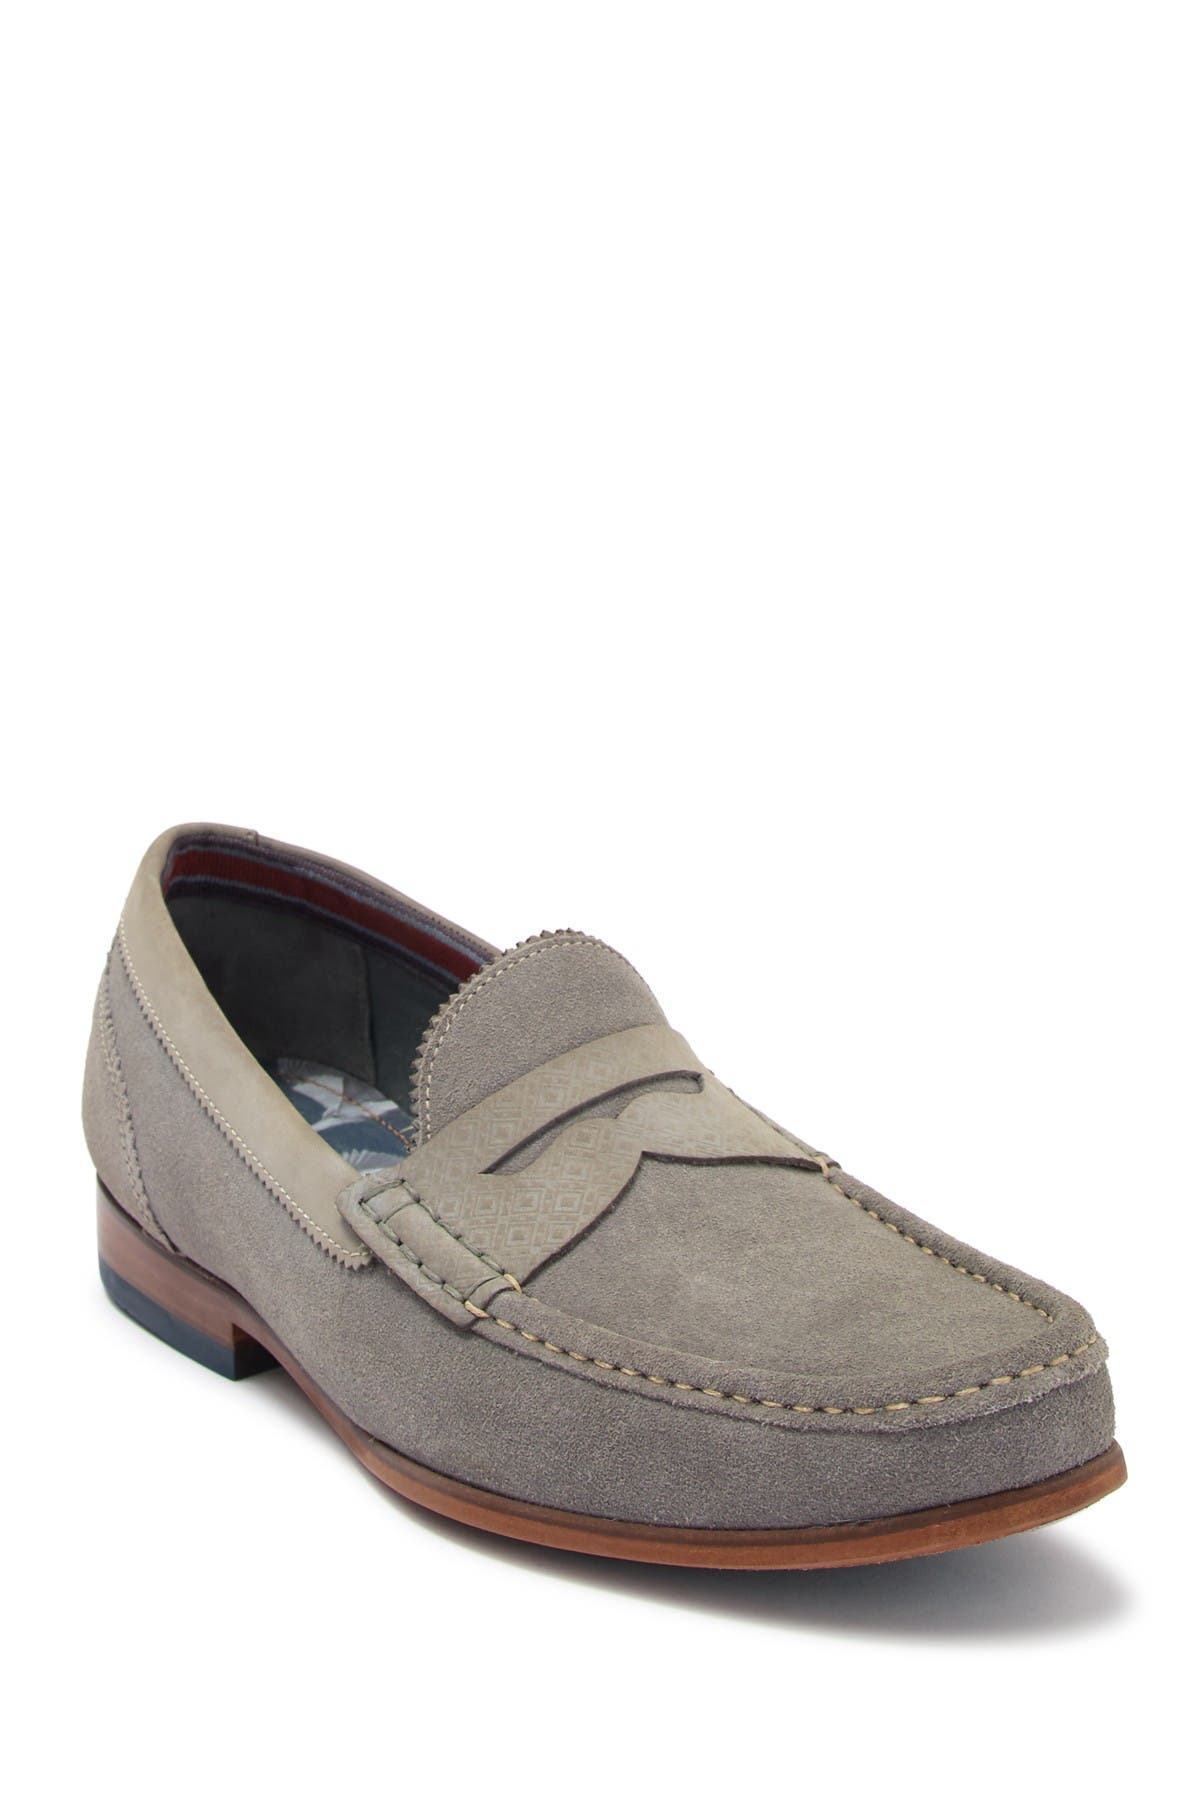 Ted Baker London | Xapon Suede Loafer 